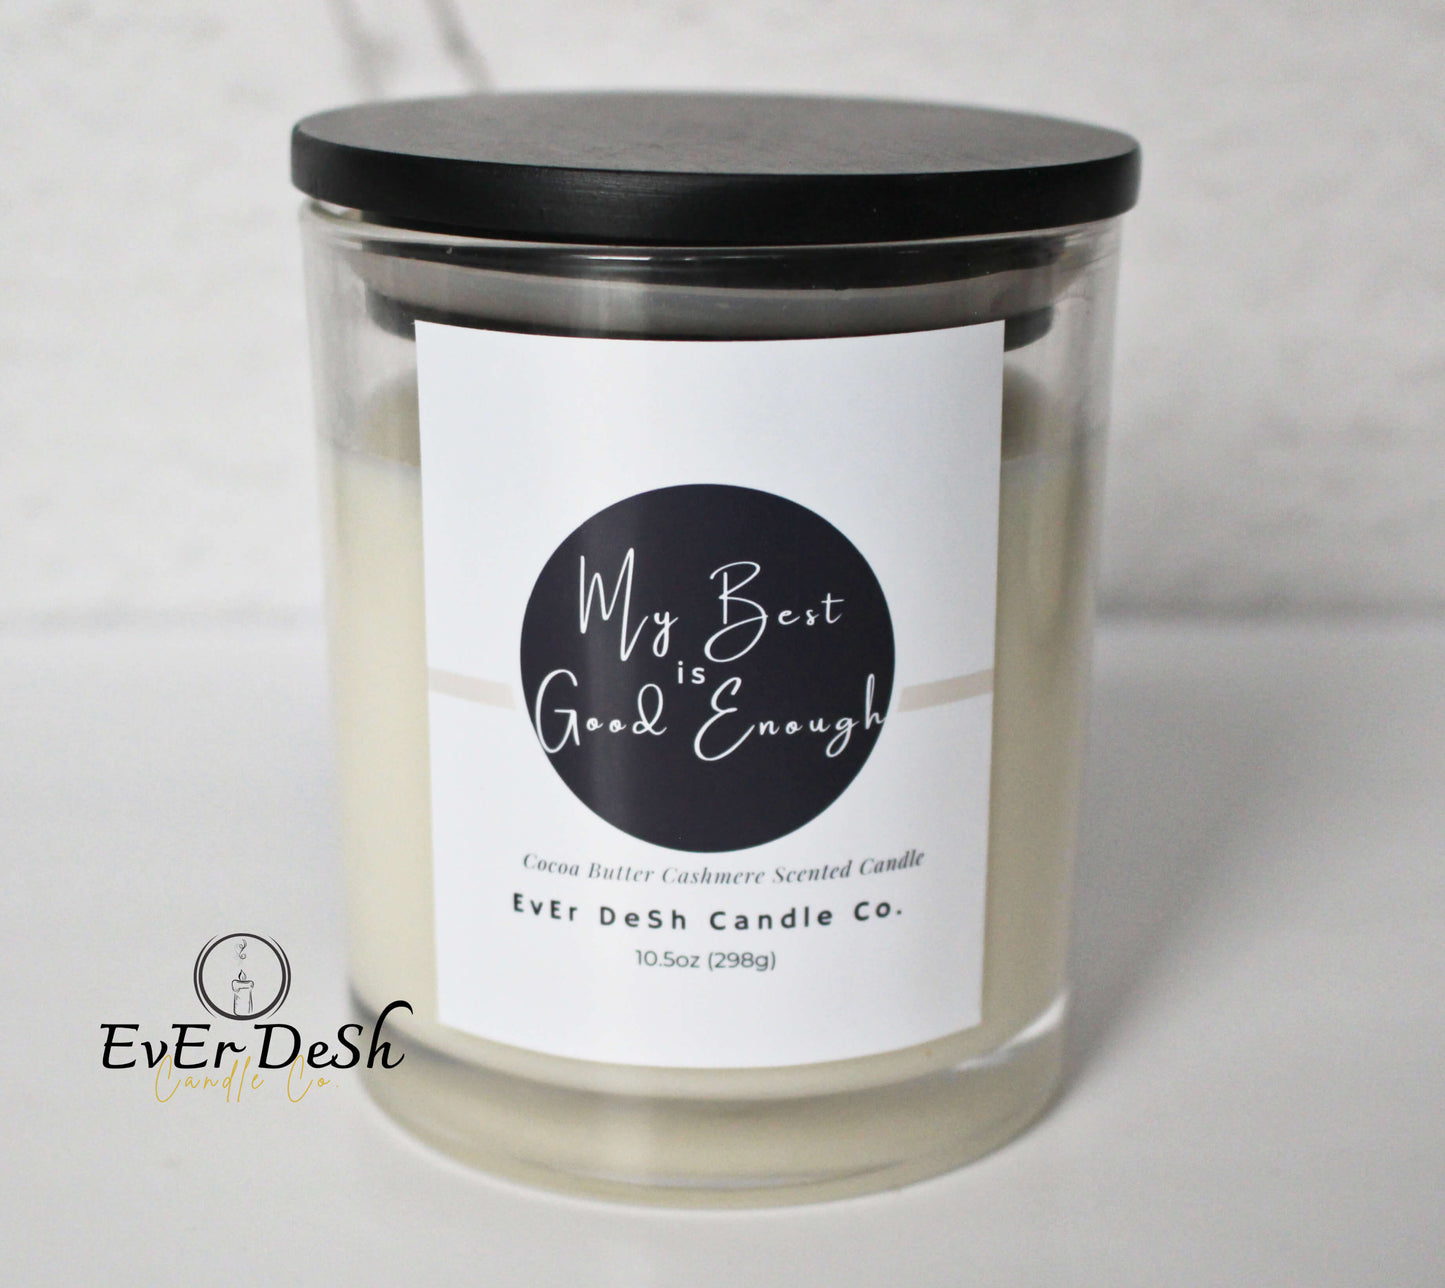 My Best is Good Enough! | Cocoa Butter Cashmere Scented Candle